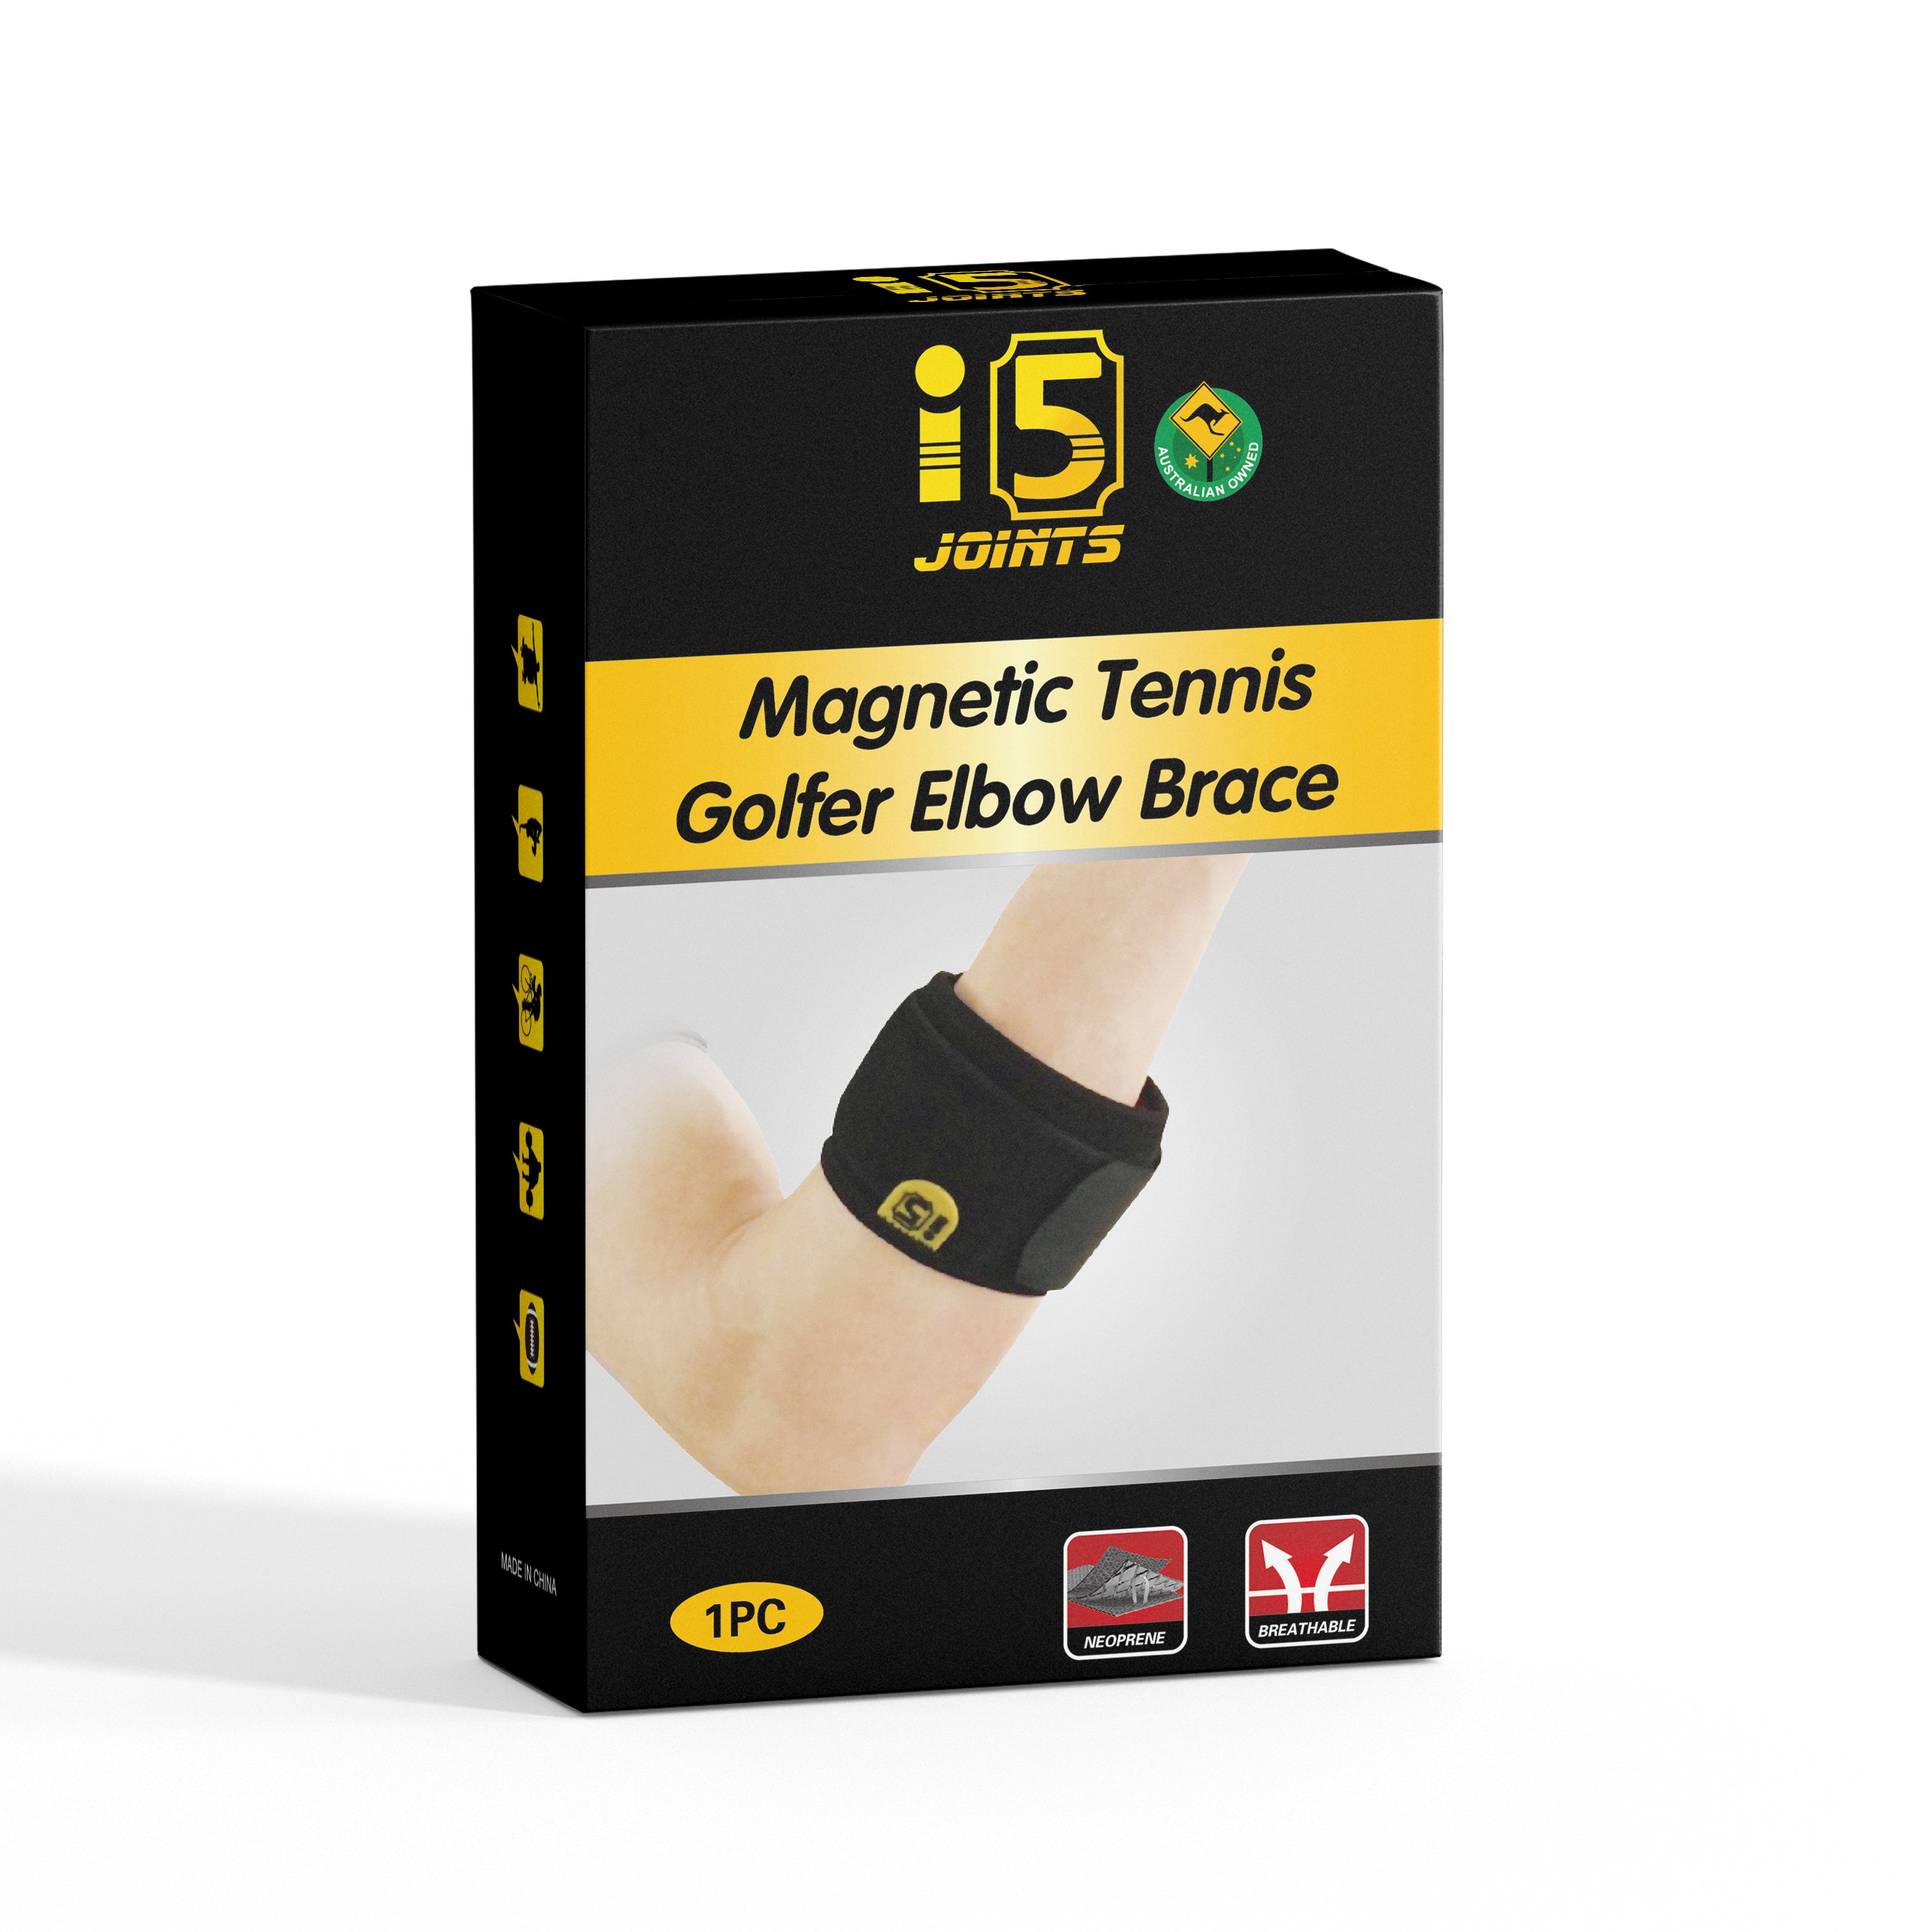 I5Joints-Magnetic Tennis Golfer Elbow Brace(Elbow Support Brace Band for Pain Relief - Elbow Support,Adjustable with Compression Pad,Elbow Support Strap for Gym, for Men & Women, Weightlifting, Volleyball & Other Sports)